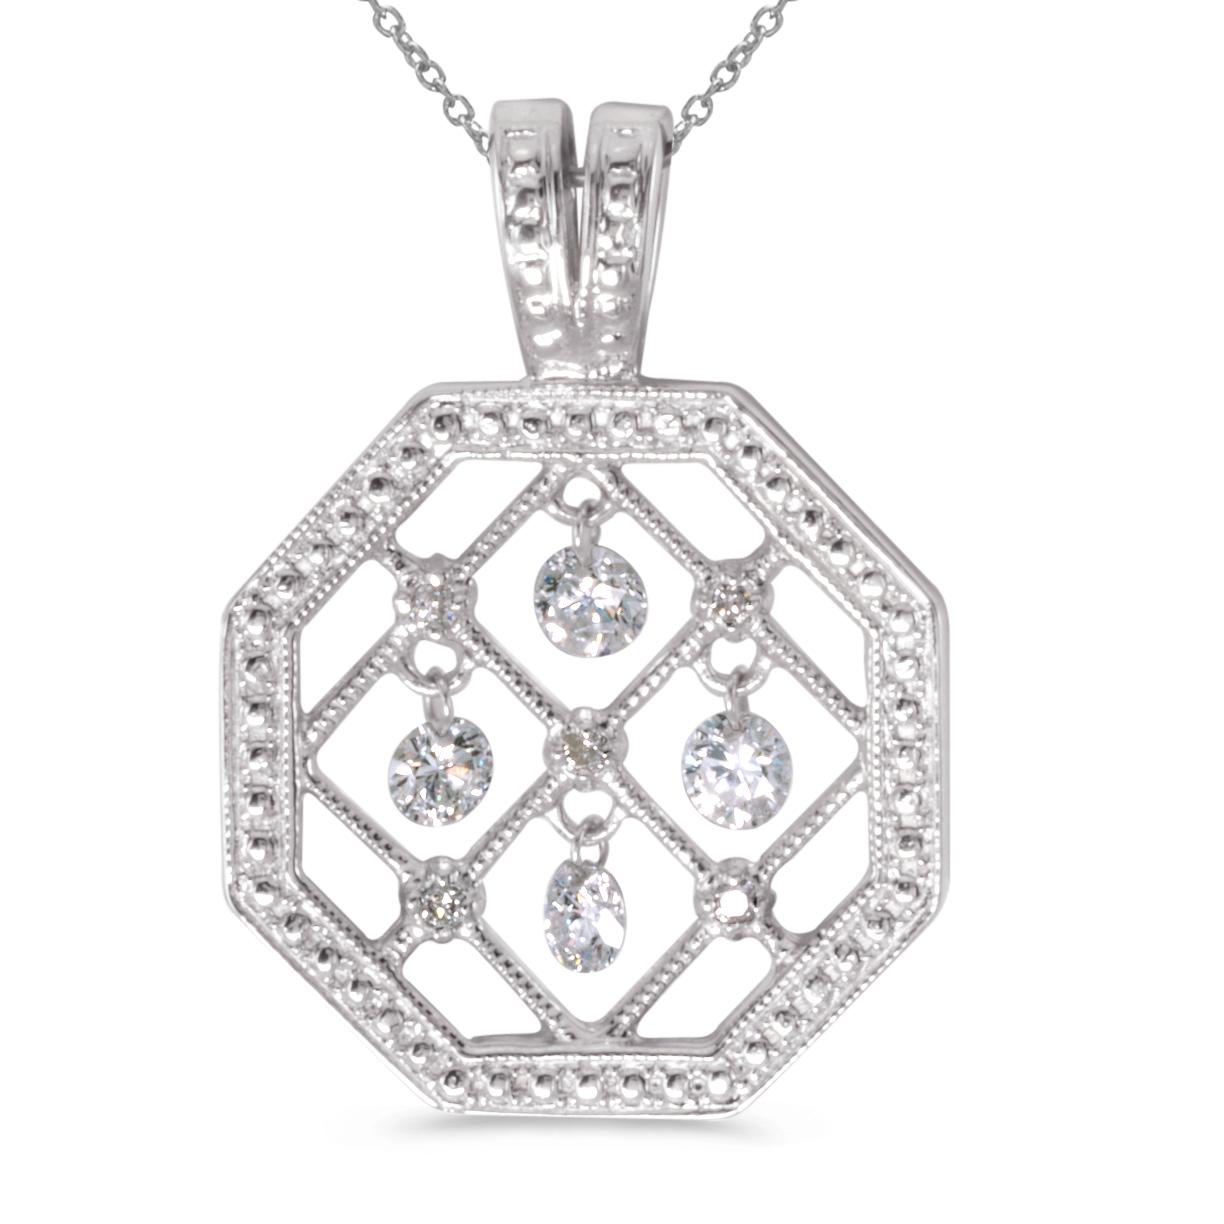 JCX2900: 14k gold Dashinng Diamonds pendant with 0.36 total ct diamonds. The center dangling diamond dances and shimmers with every heartbeat.